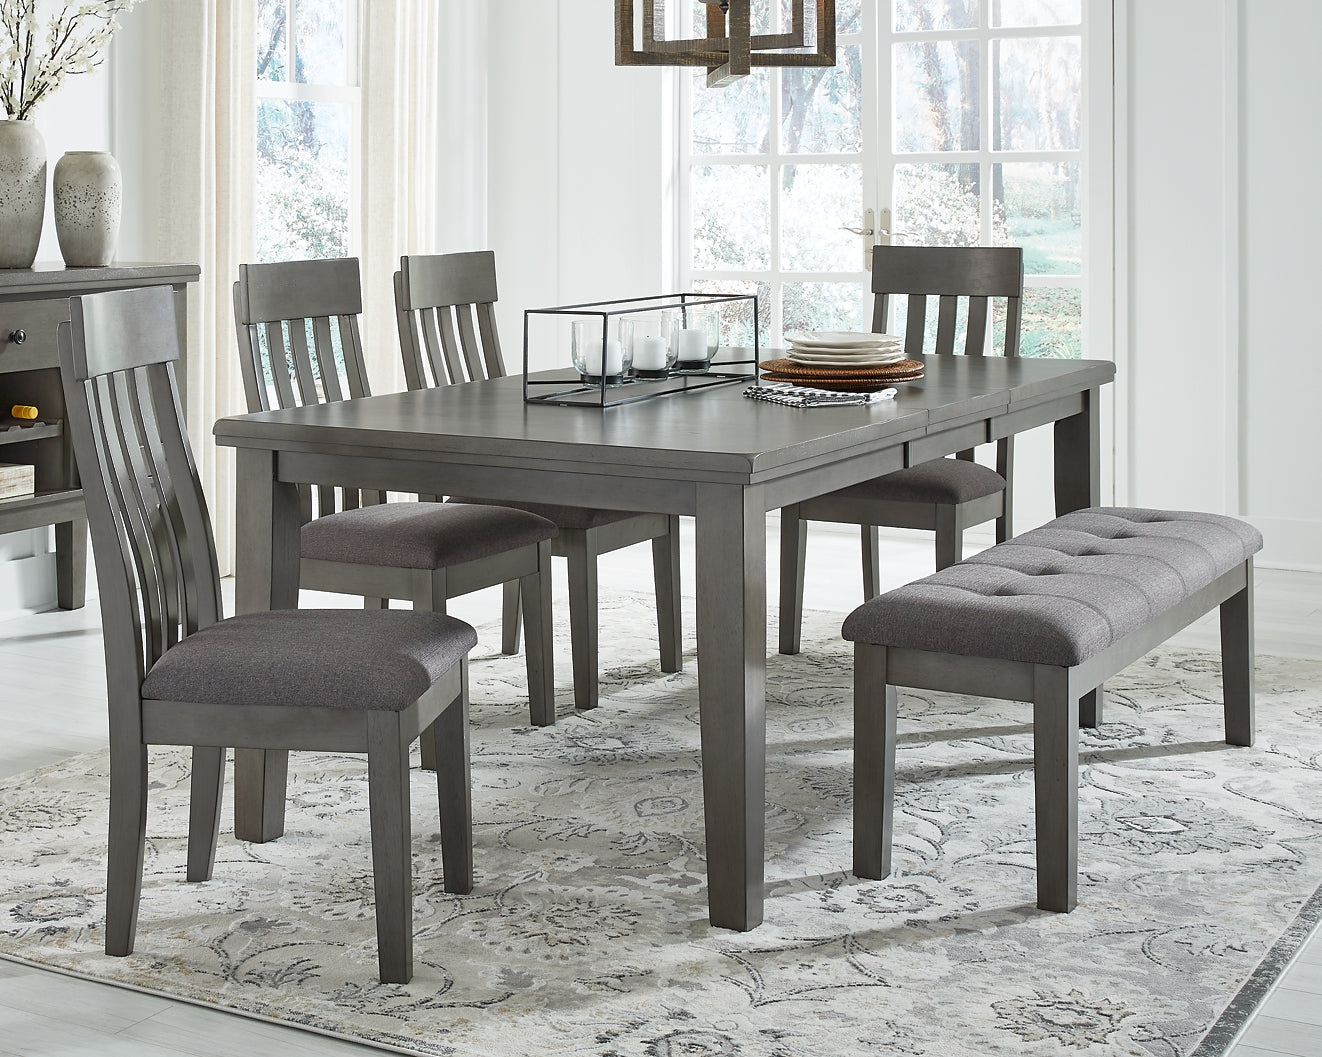 Hallanden Dining Table and 4 Chairs and Bench with Storage Signature Design by Ashley®